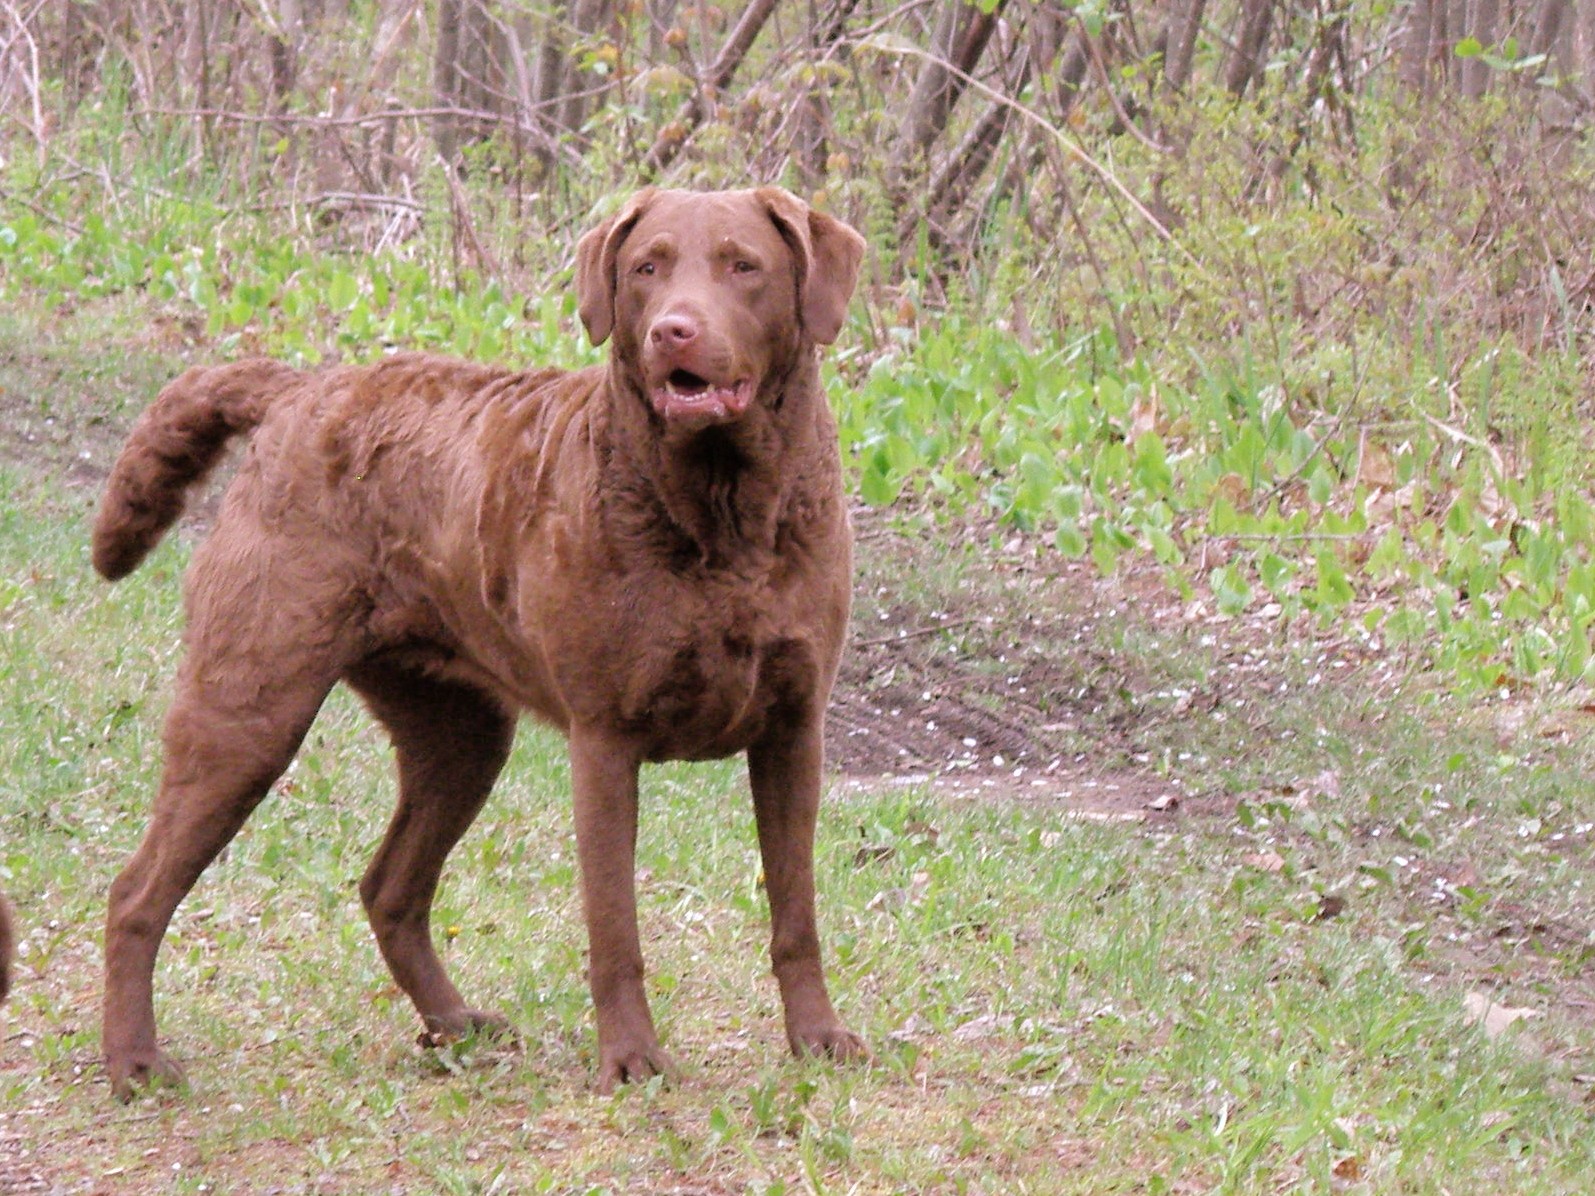 Chesapeake Bay Retriever Dog In The Forest Photo - Cane Chesapeake Bay Retriever , HD Wallpaper & Backgrounds